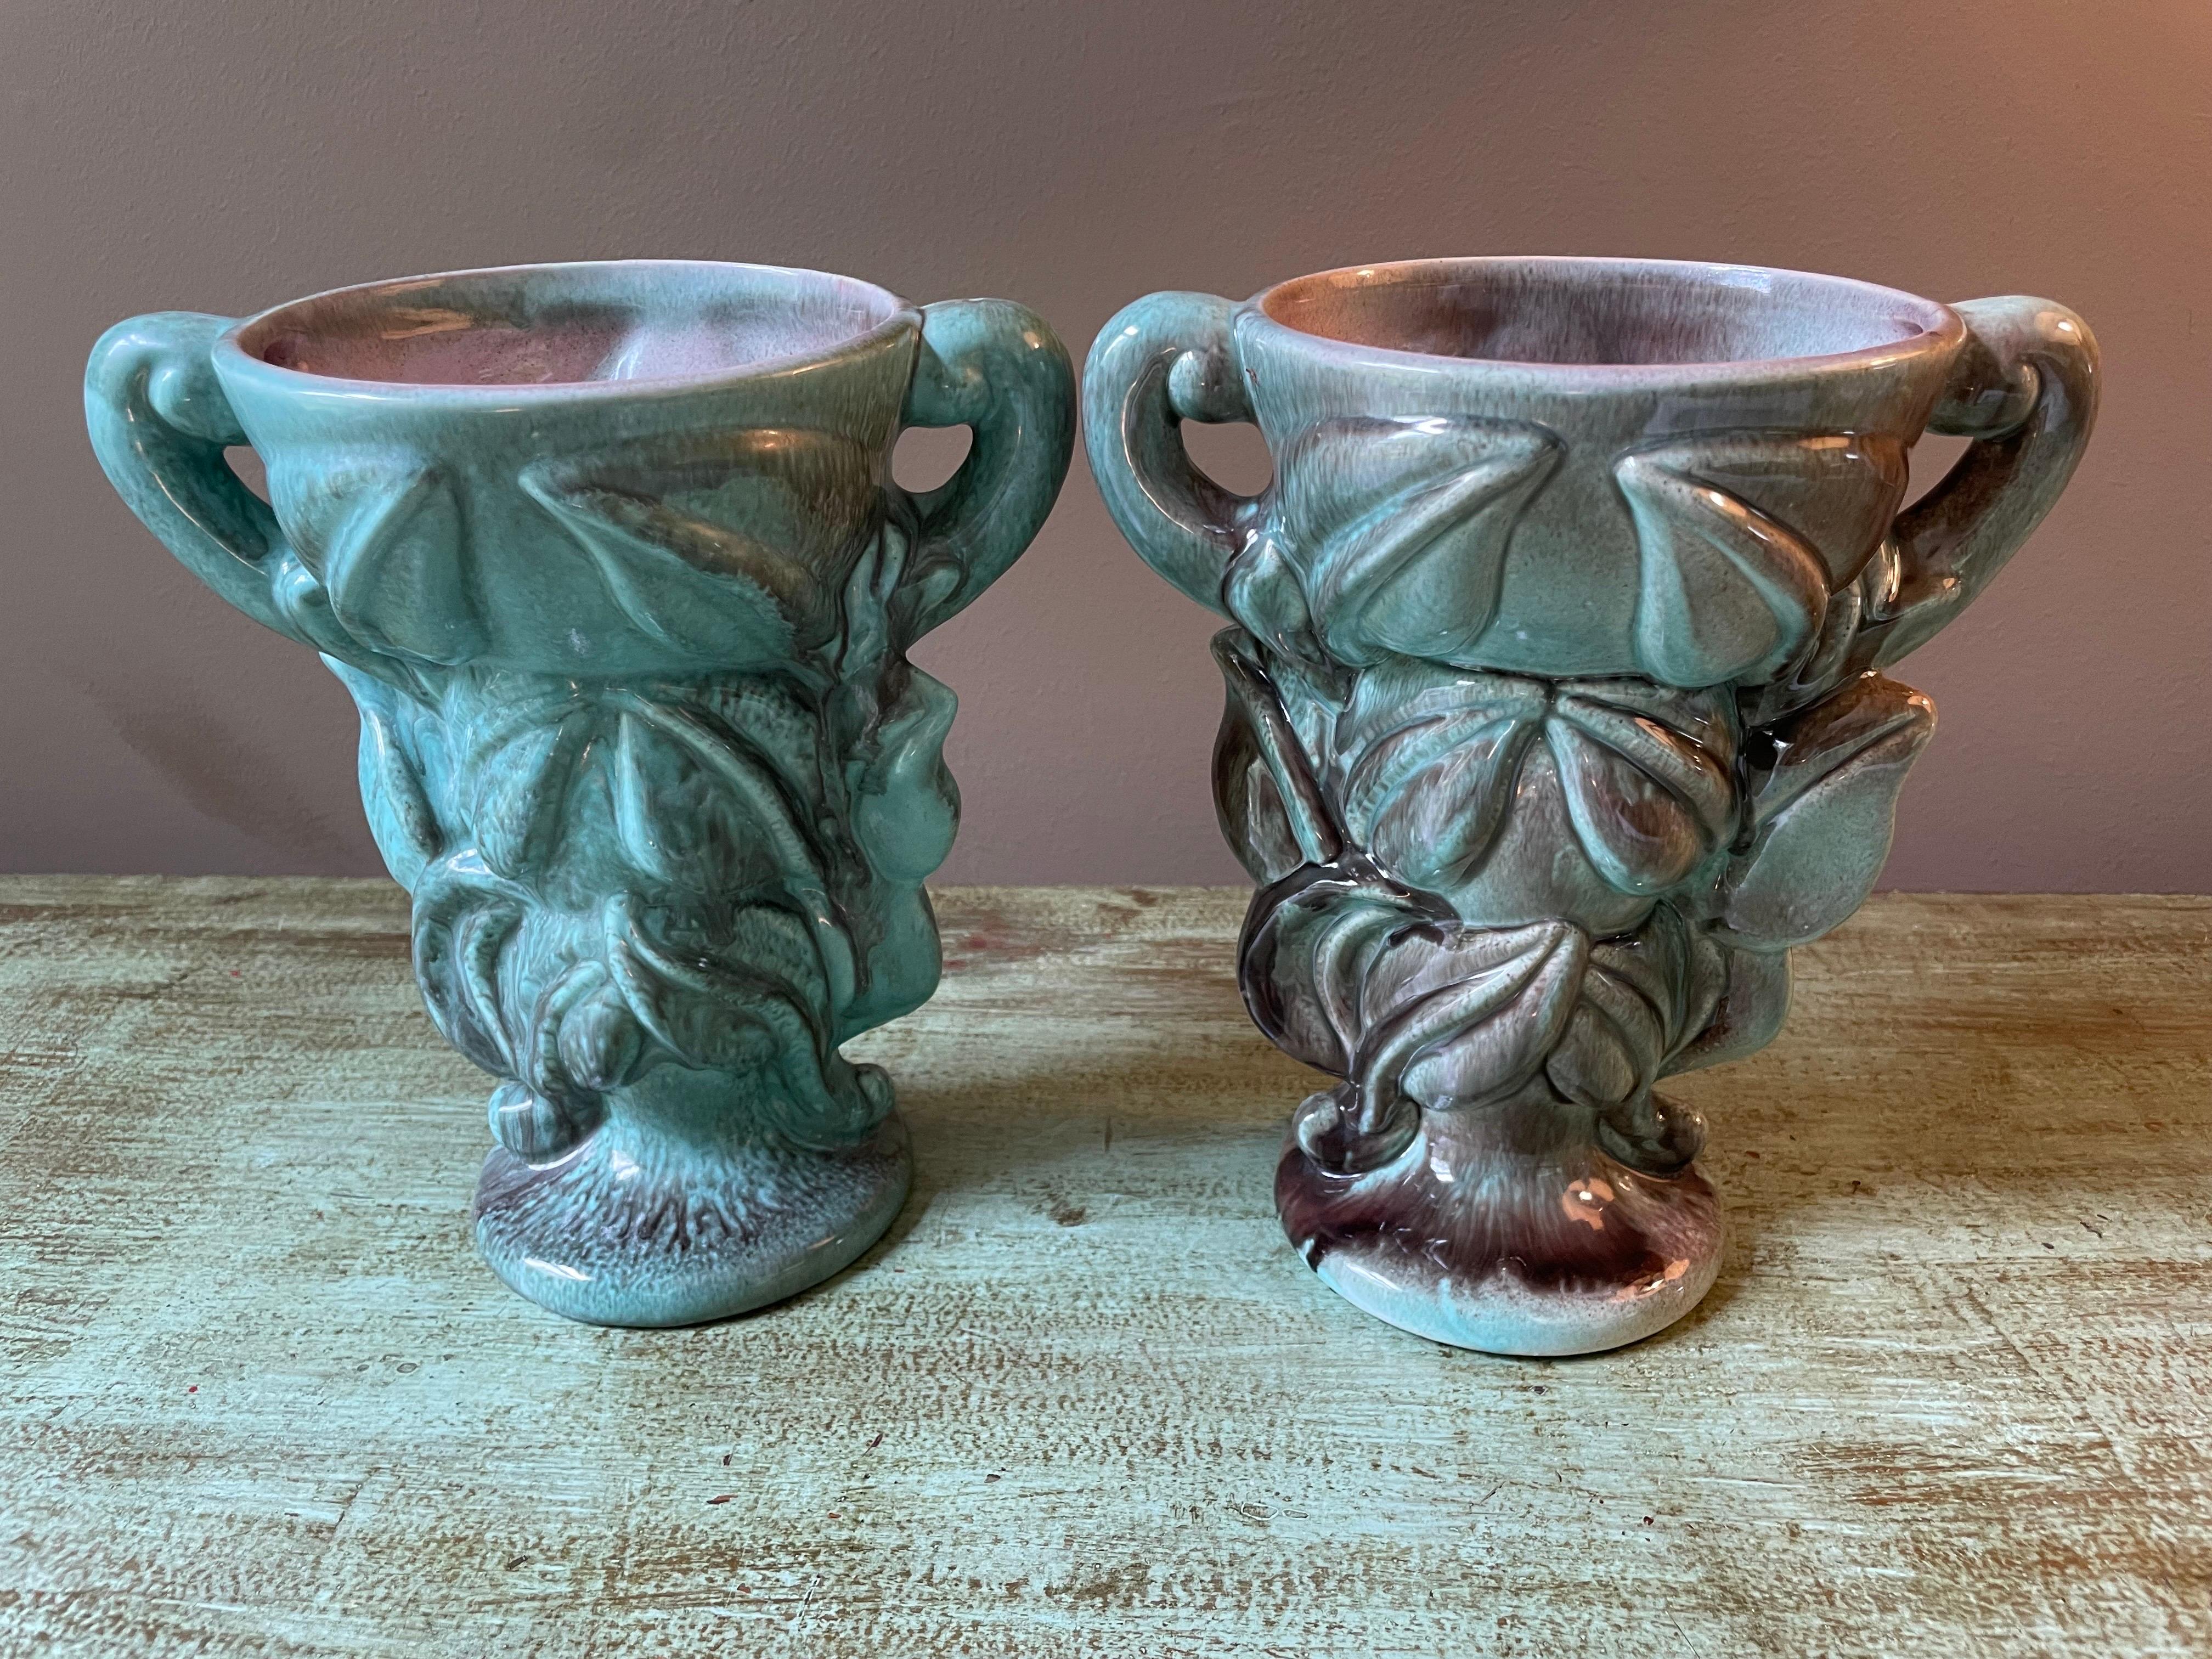 Attractive and unique, this wild vase pair will bring impact to any room! Great color and handwork are on display in this mid 20th century find - possibly a married pair? The greens flowing into interior pinks - who needs flowers in these beauties?.